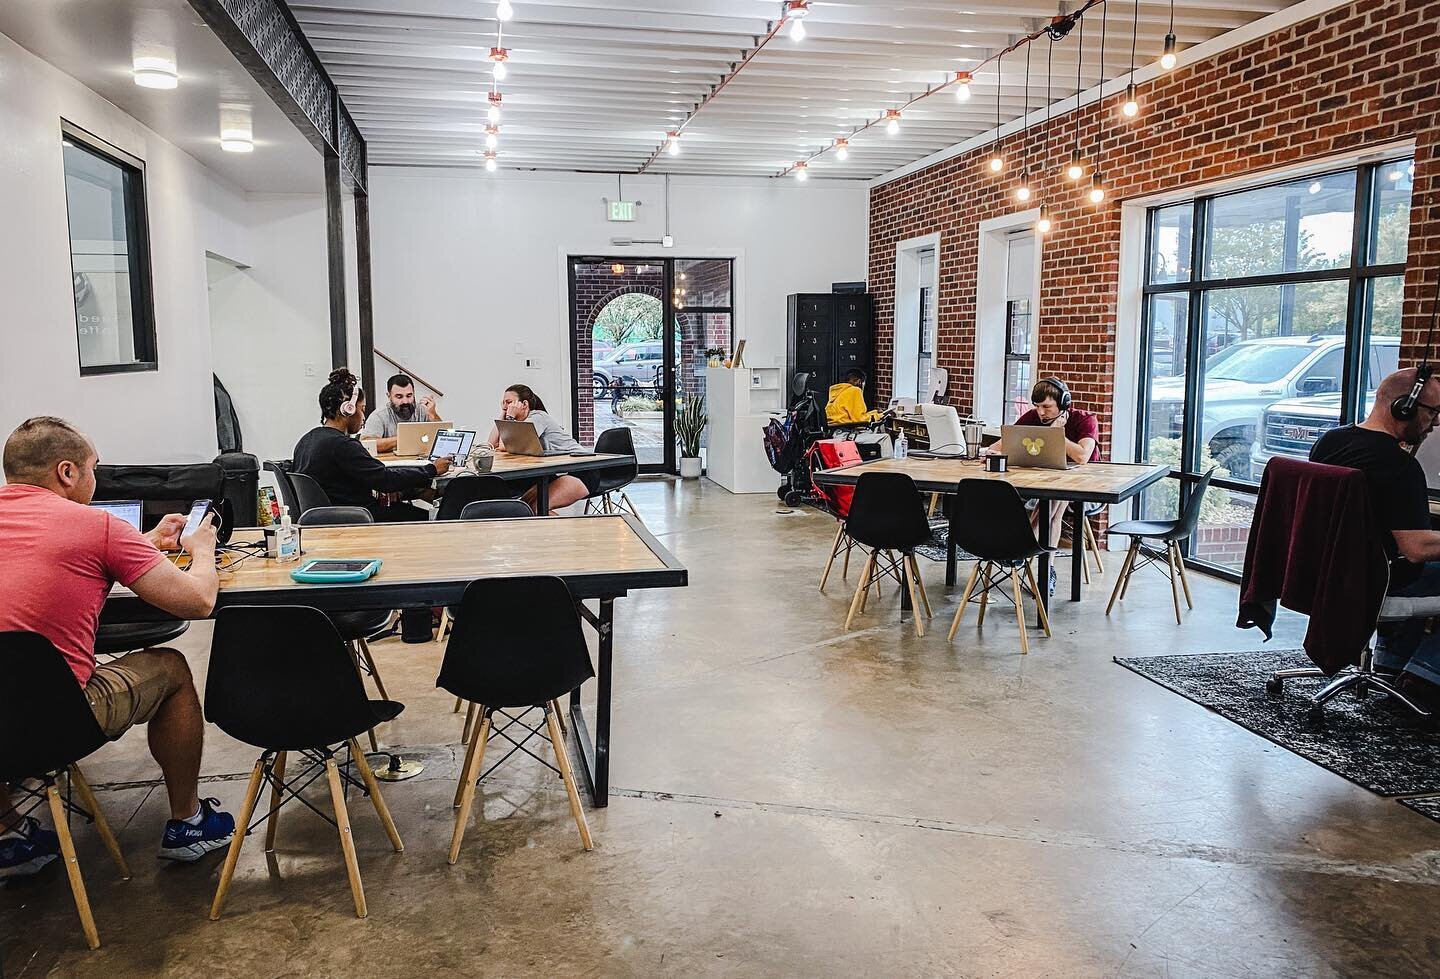 No matter the weather, the vibes are always sunny at The Hub!  Schedule a tour today and learn more about the vibes, the people, and the space that make The Hub the awesome place to cowork that it is. ☺️